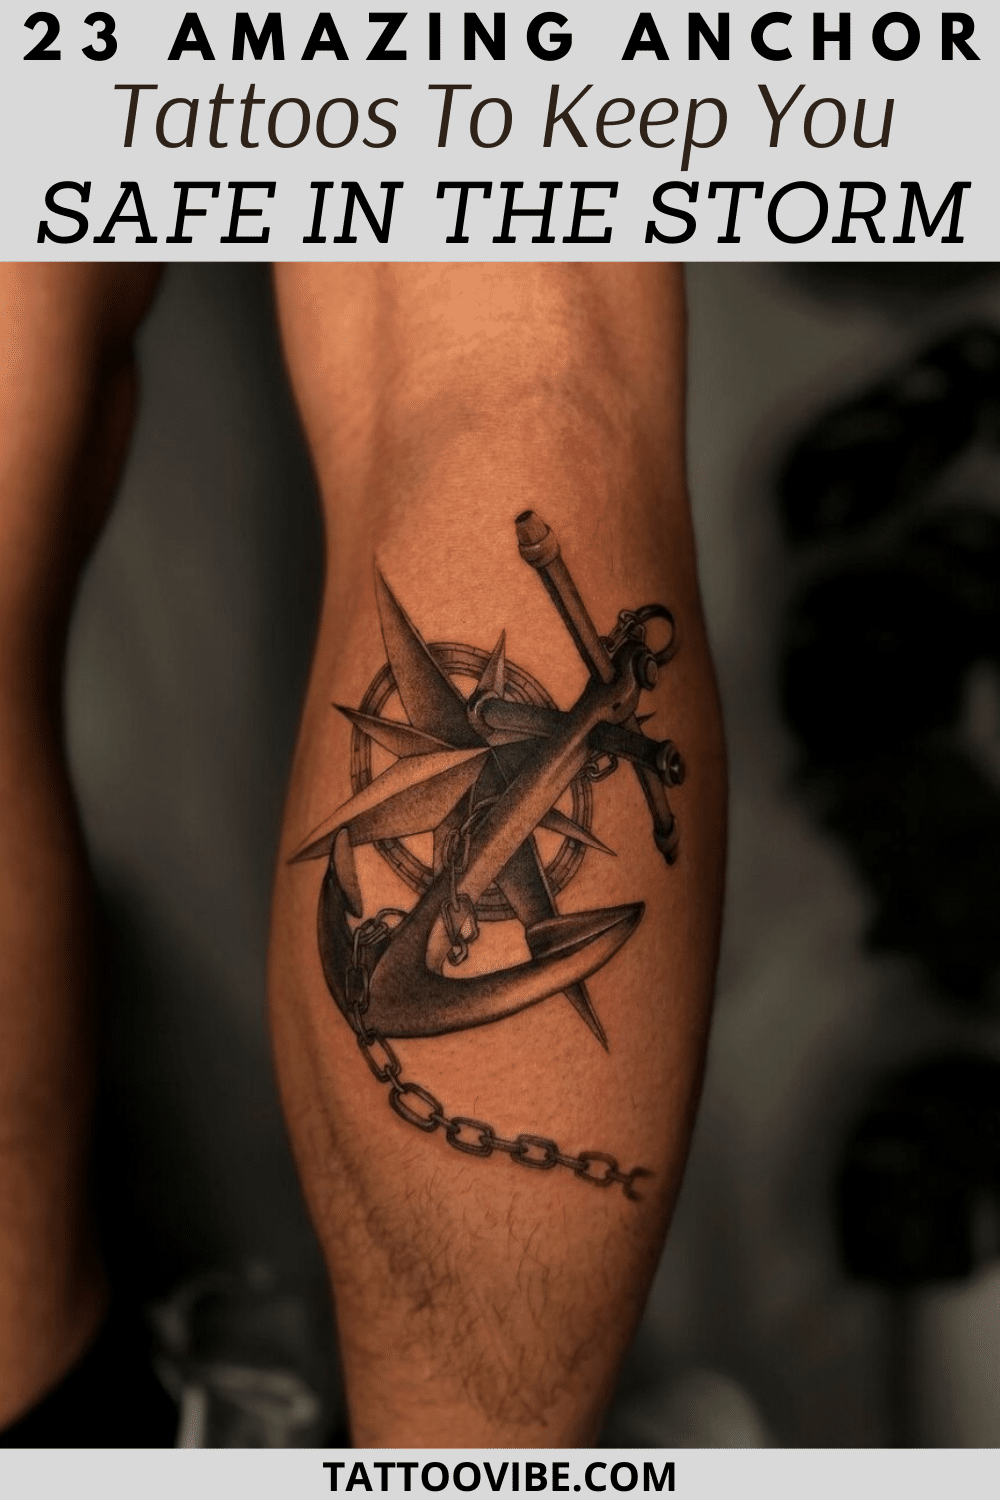 23 Amazing Anchor Tattoos To Keep You Safe In The Storm